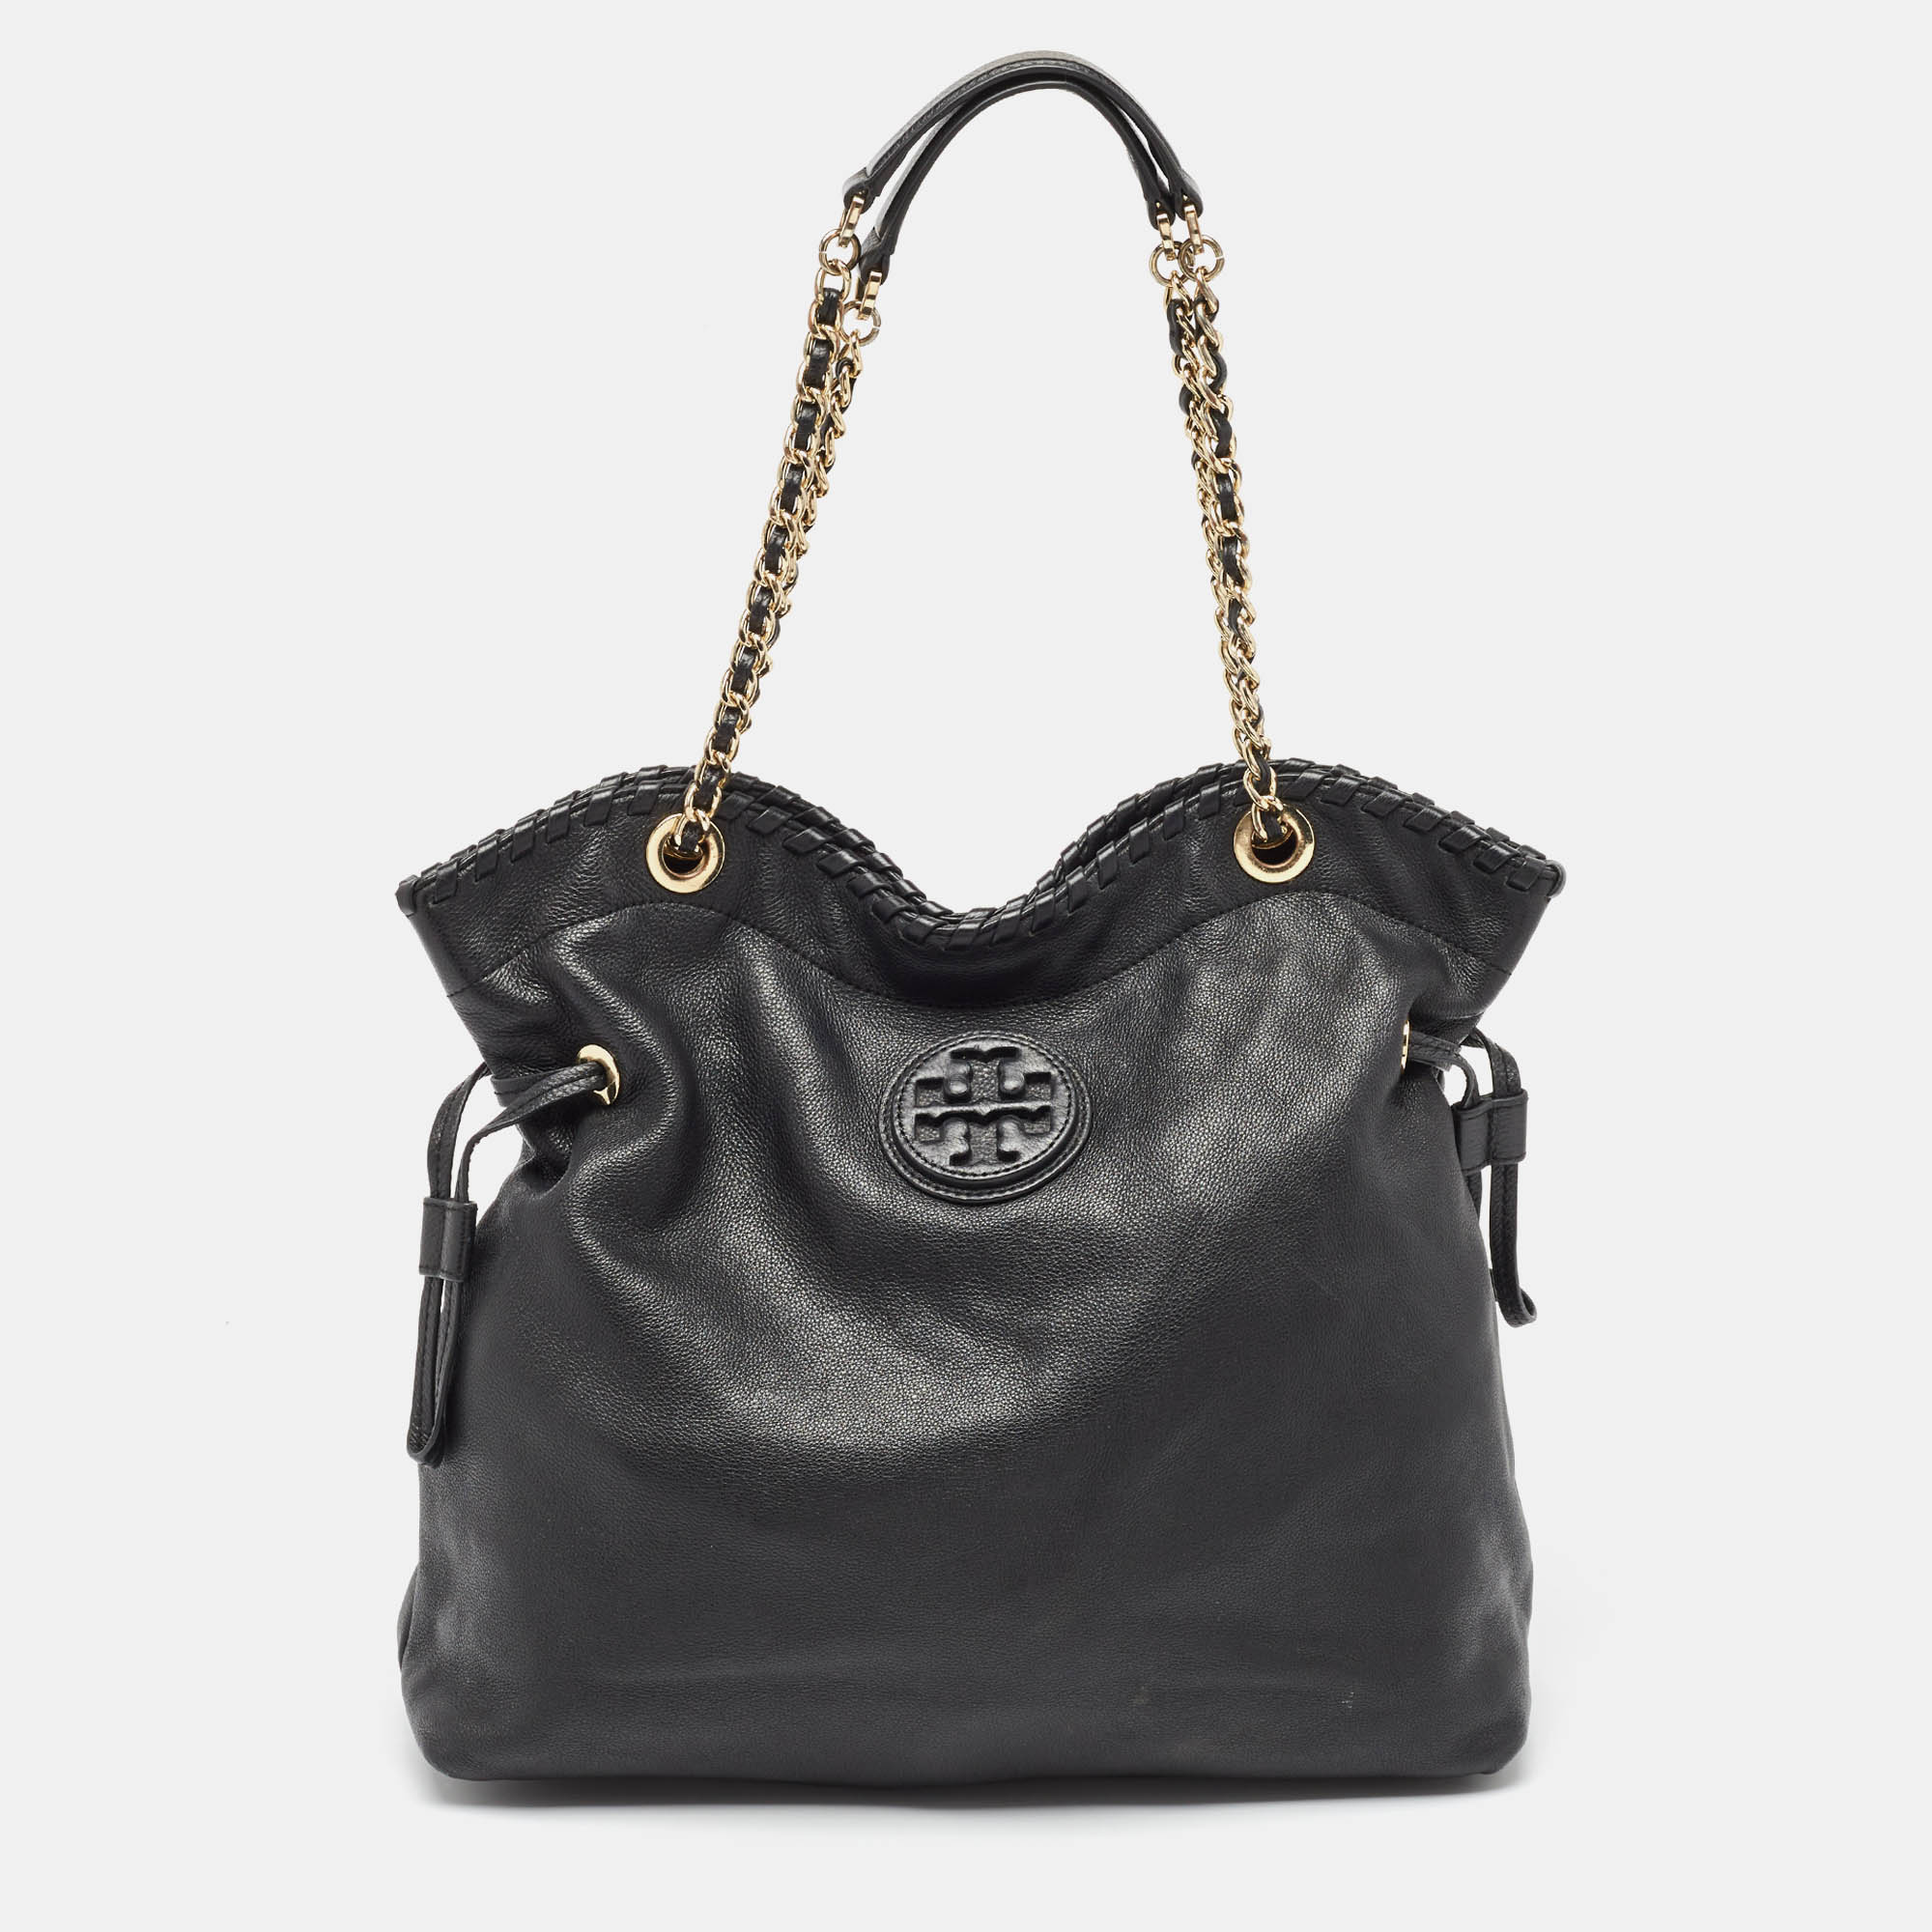 

Tory Burch Black Leather Slouchy Marion Tote